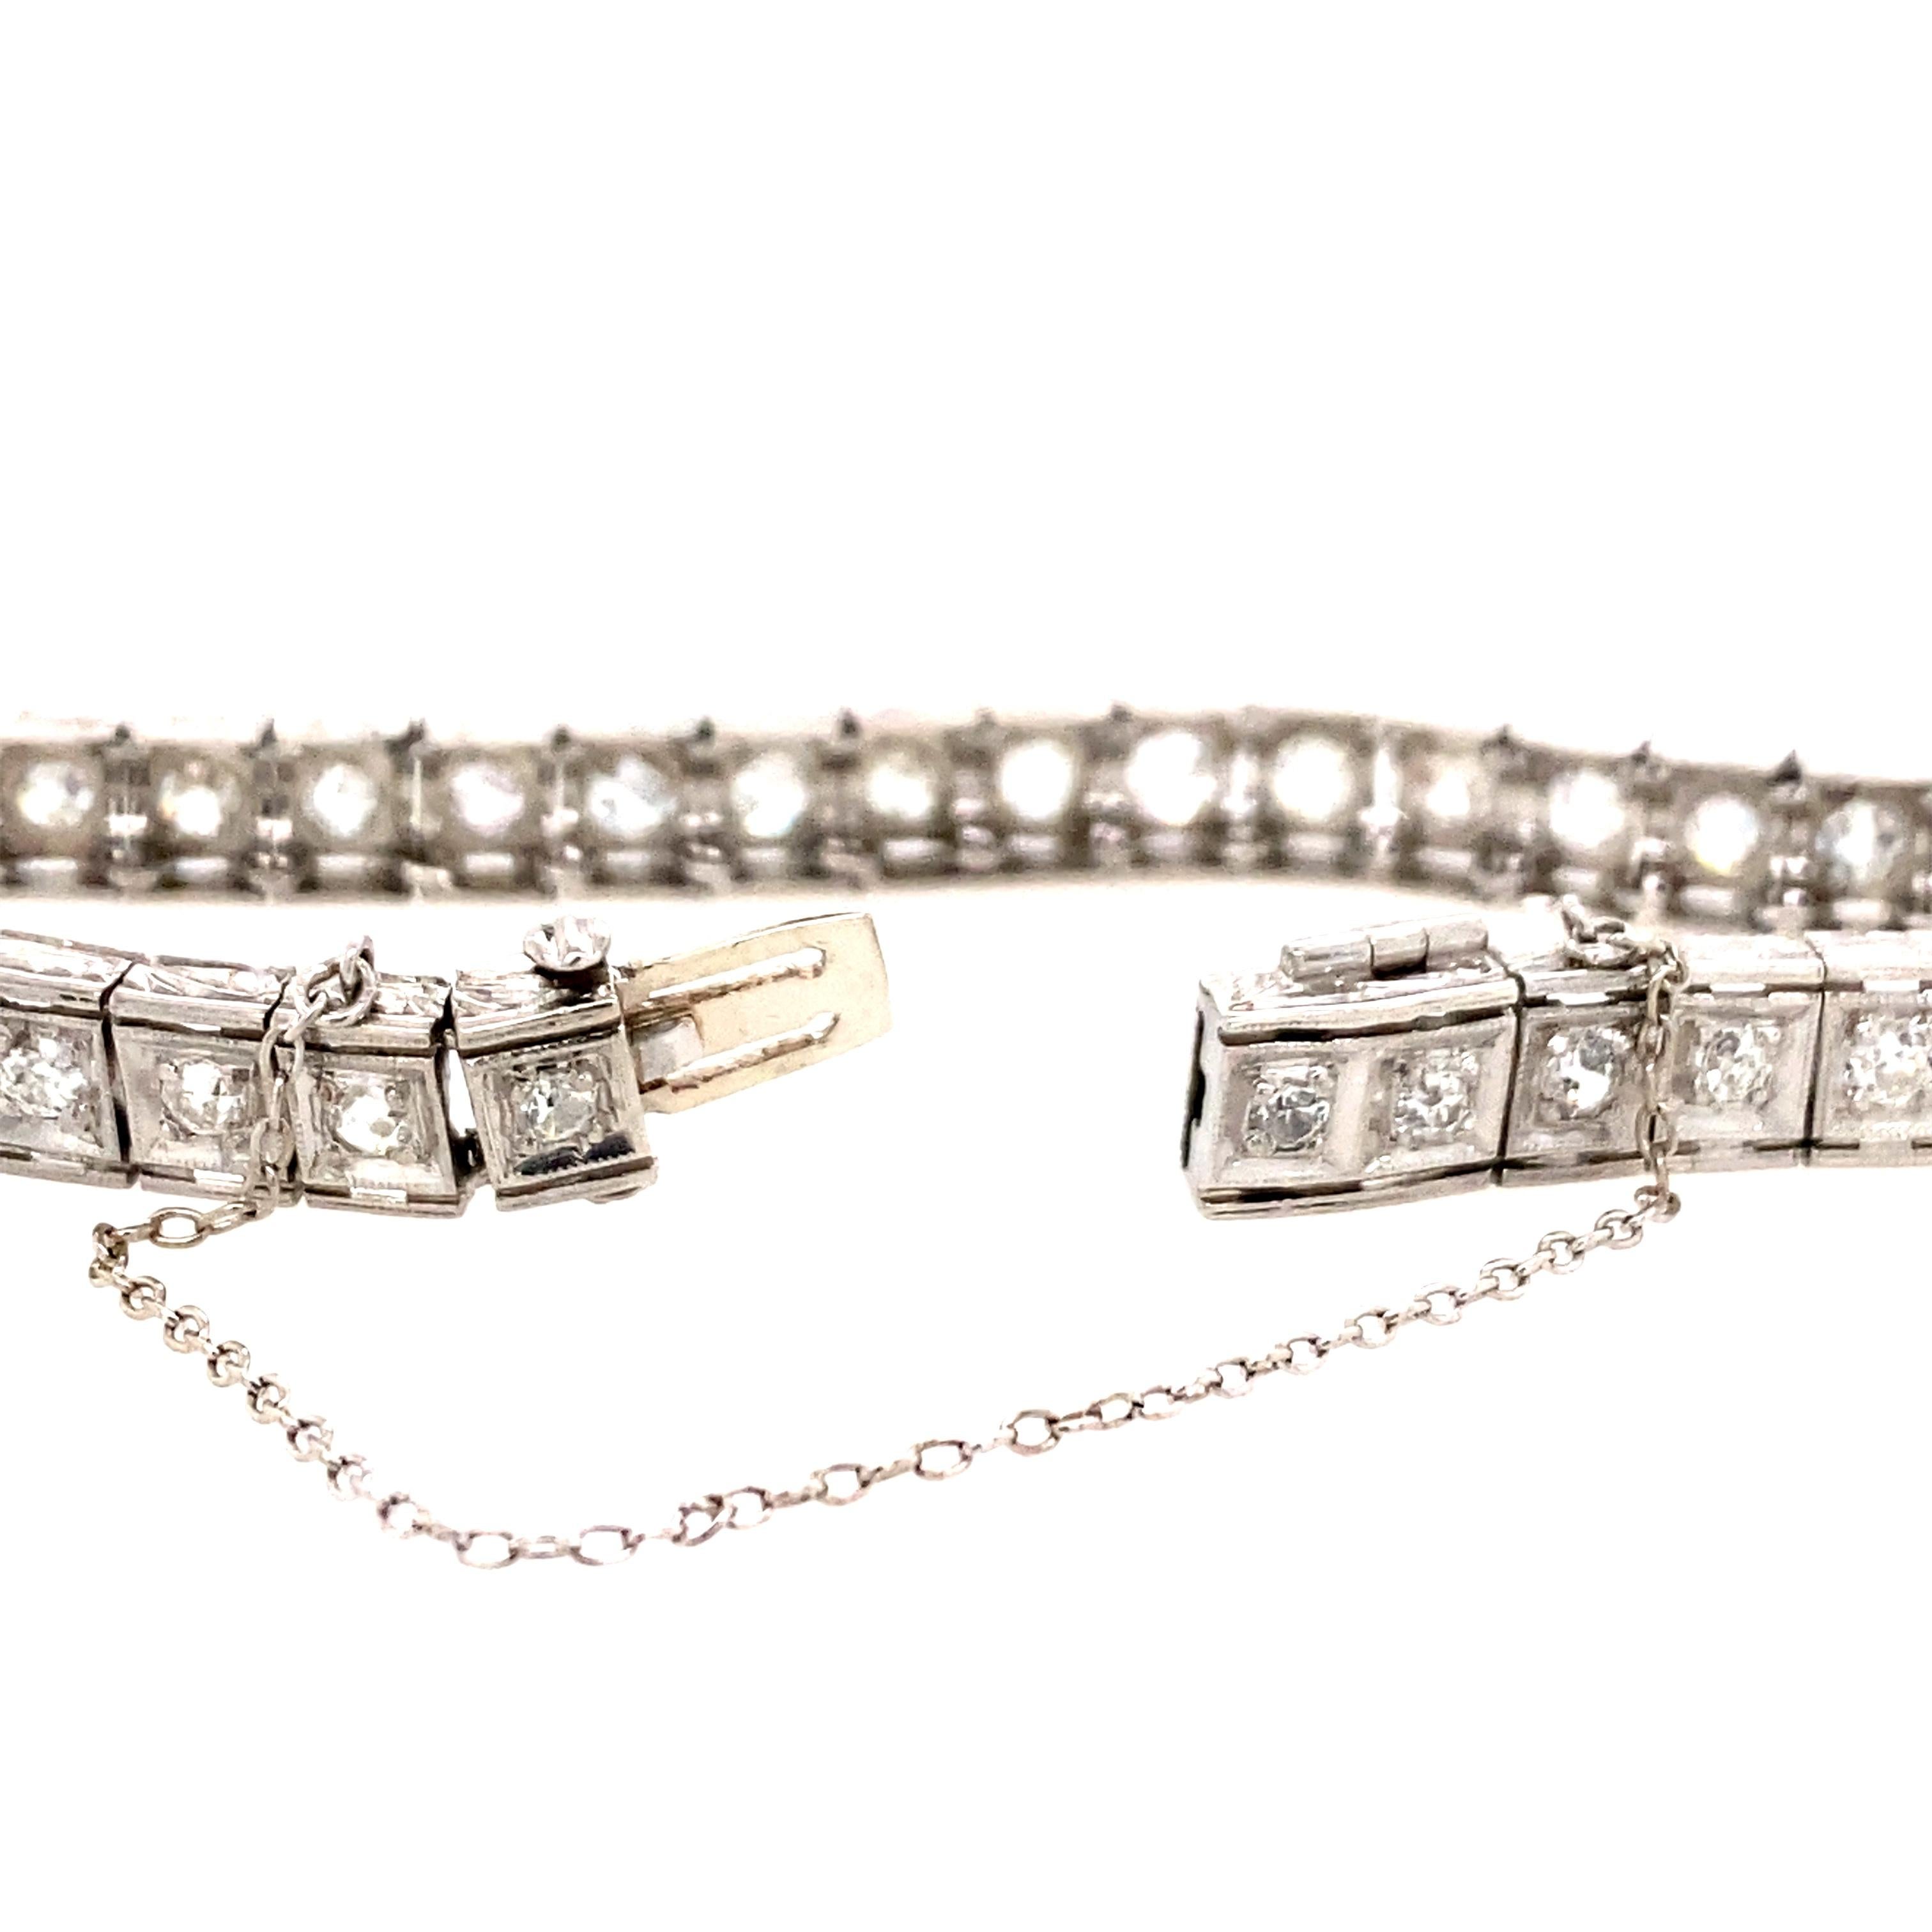 One estate platinum diamond line bracelet with forty Old European cut diamonds set in square shaped settings, 3.50 carats total weight with matching H/I color and SI1/SI2 clarity. The bracelet measures 7.25 inches in length, weighs 21.5 grams and